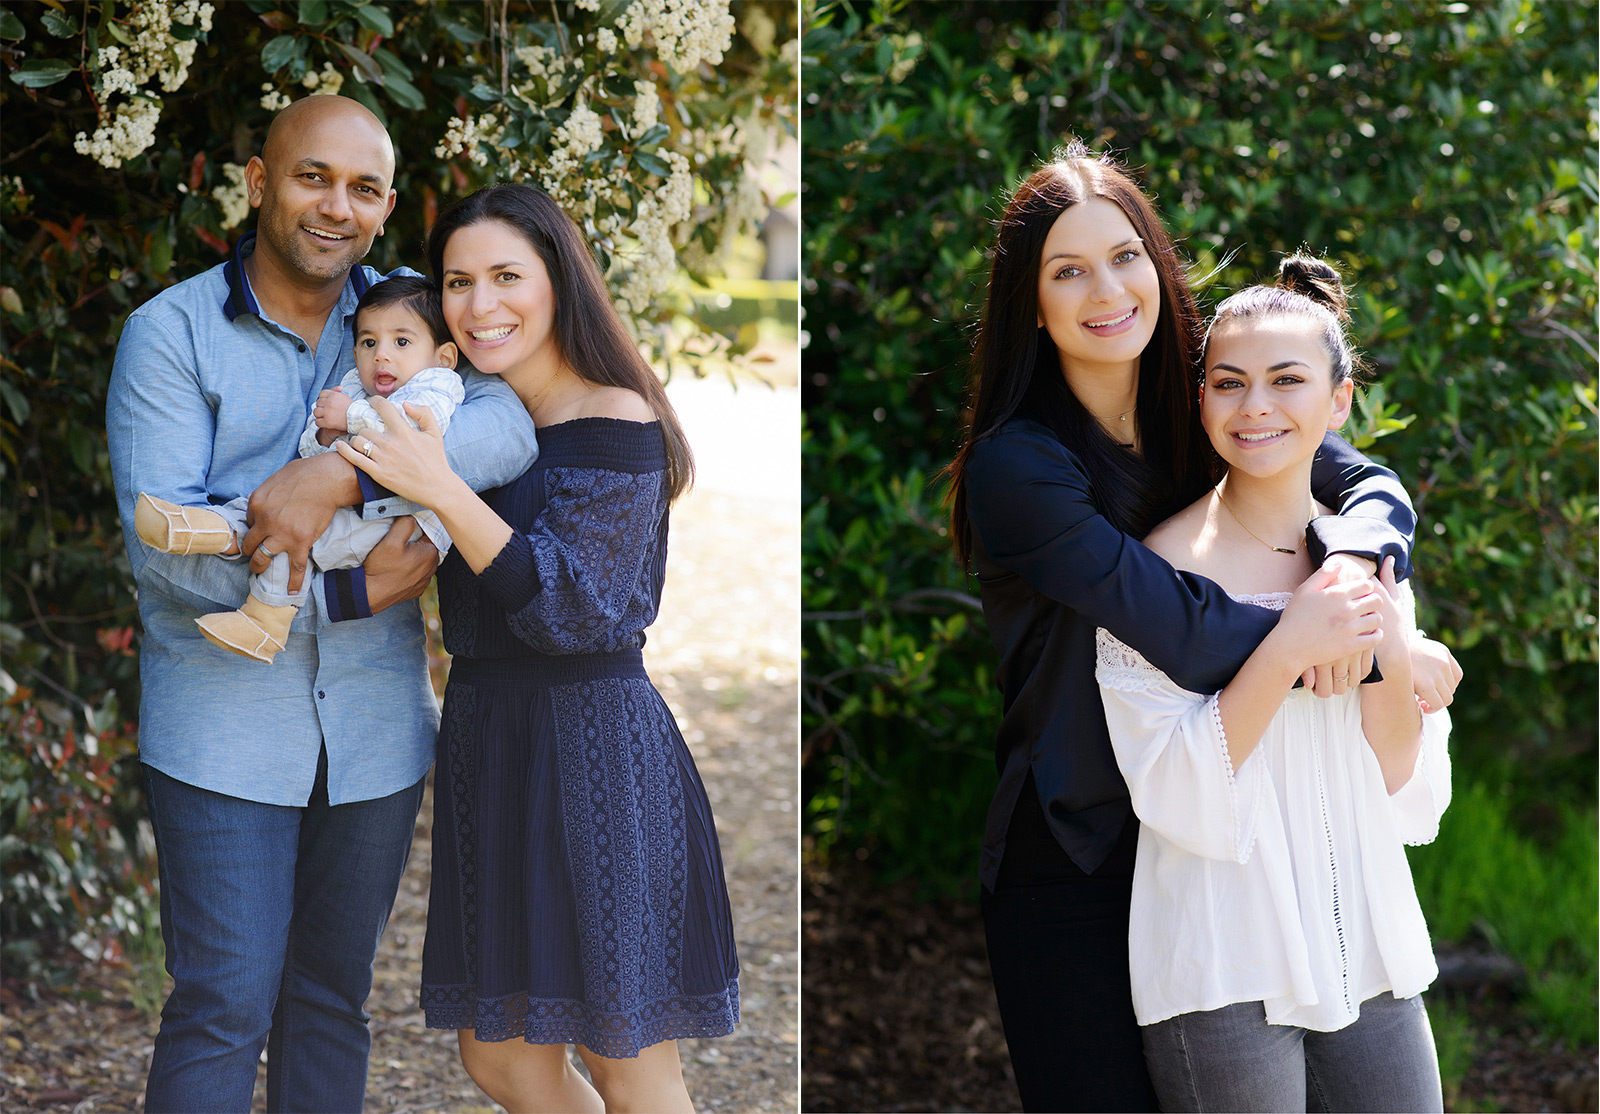 Family photos outdoors in El Dorado Hills wearing a mix of blues and textured clothes